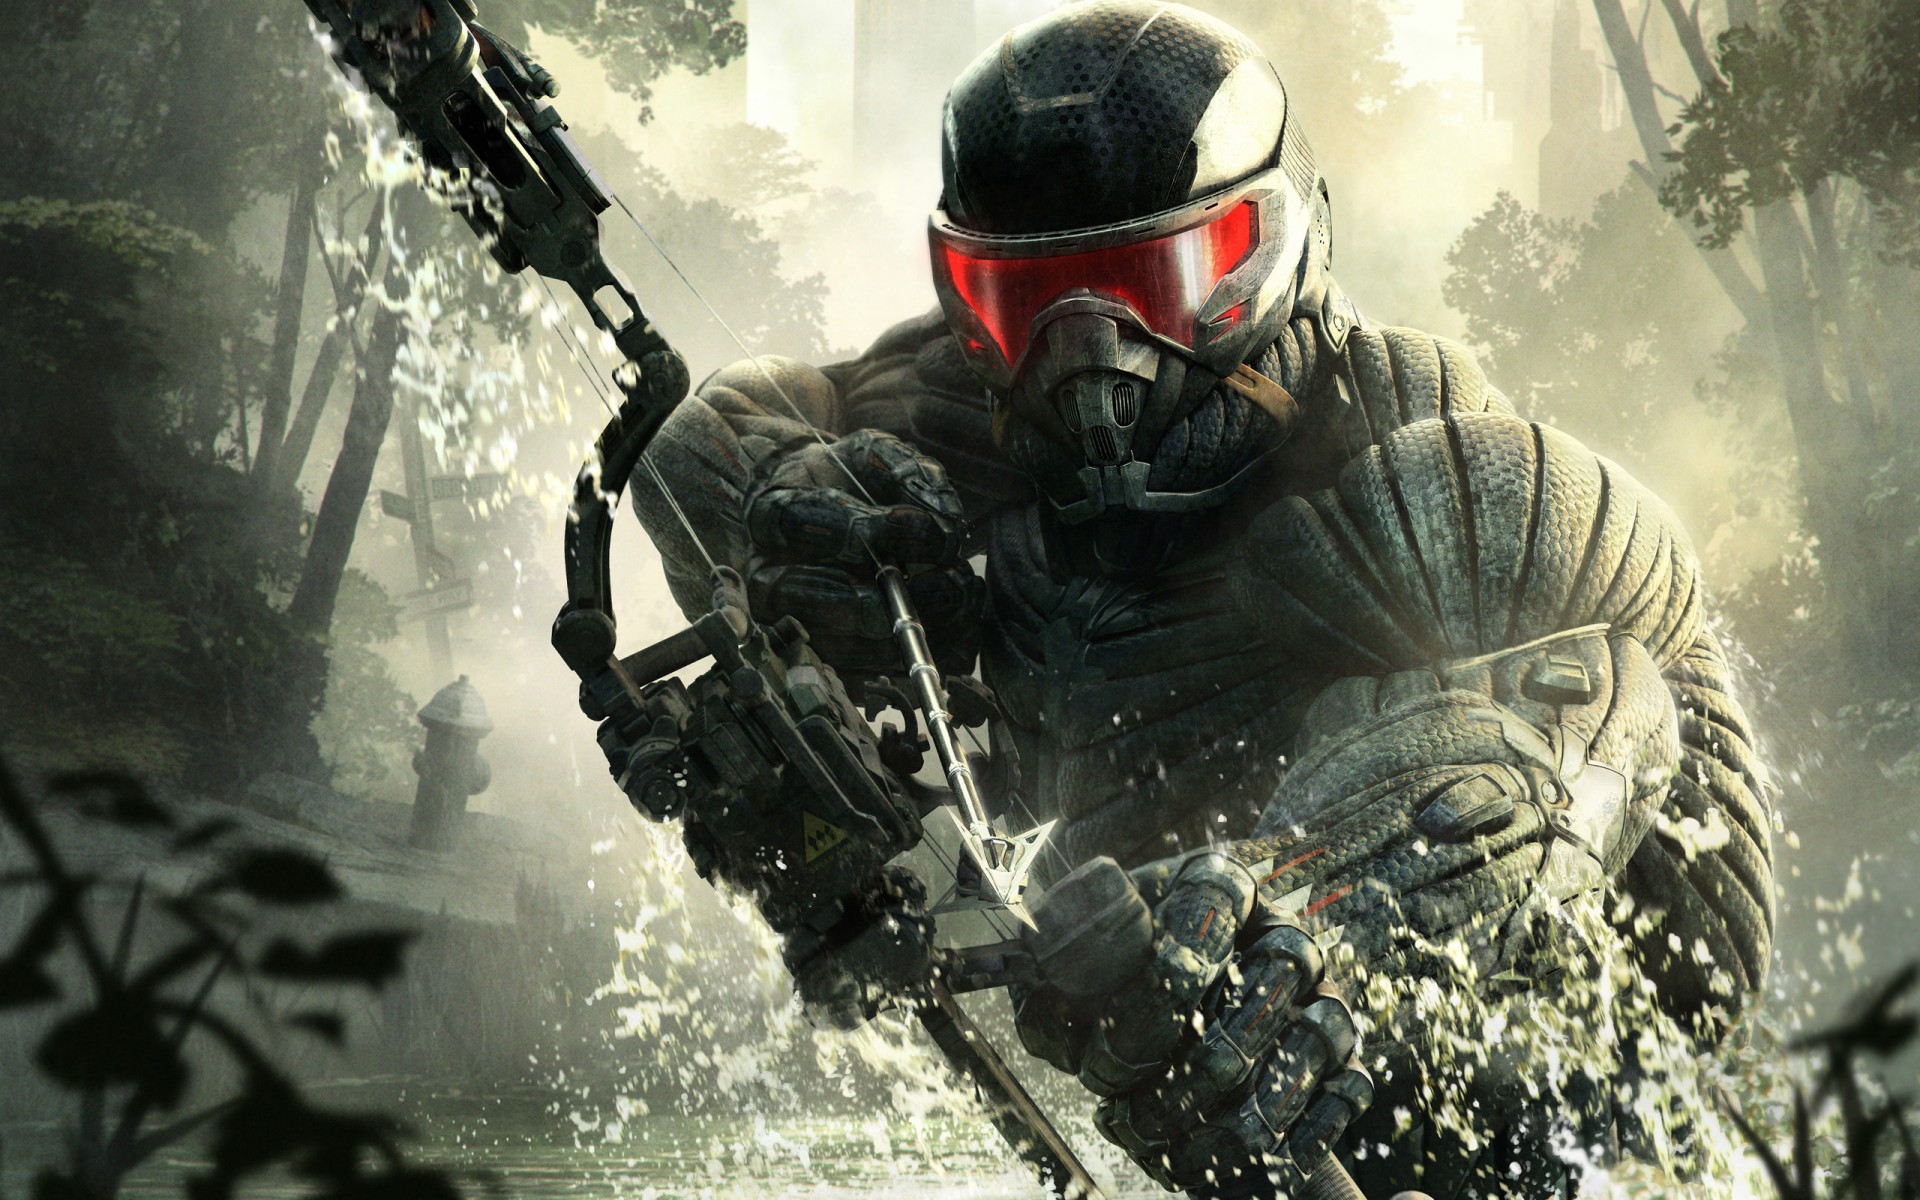 android crysis 3, crysis, video game, laurence 'prophet' barnes